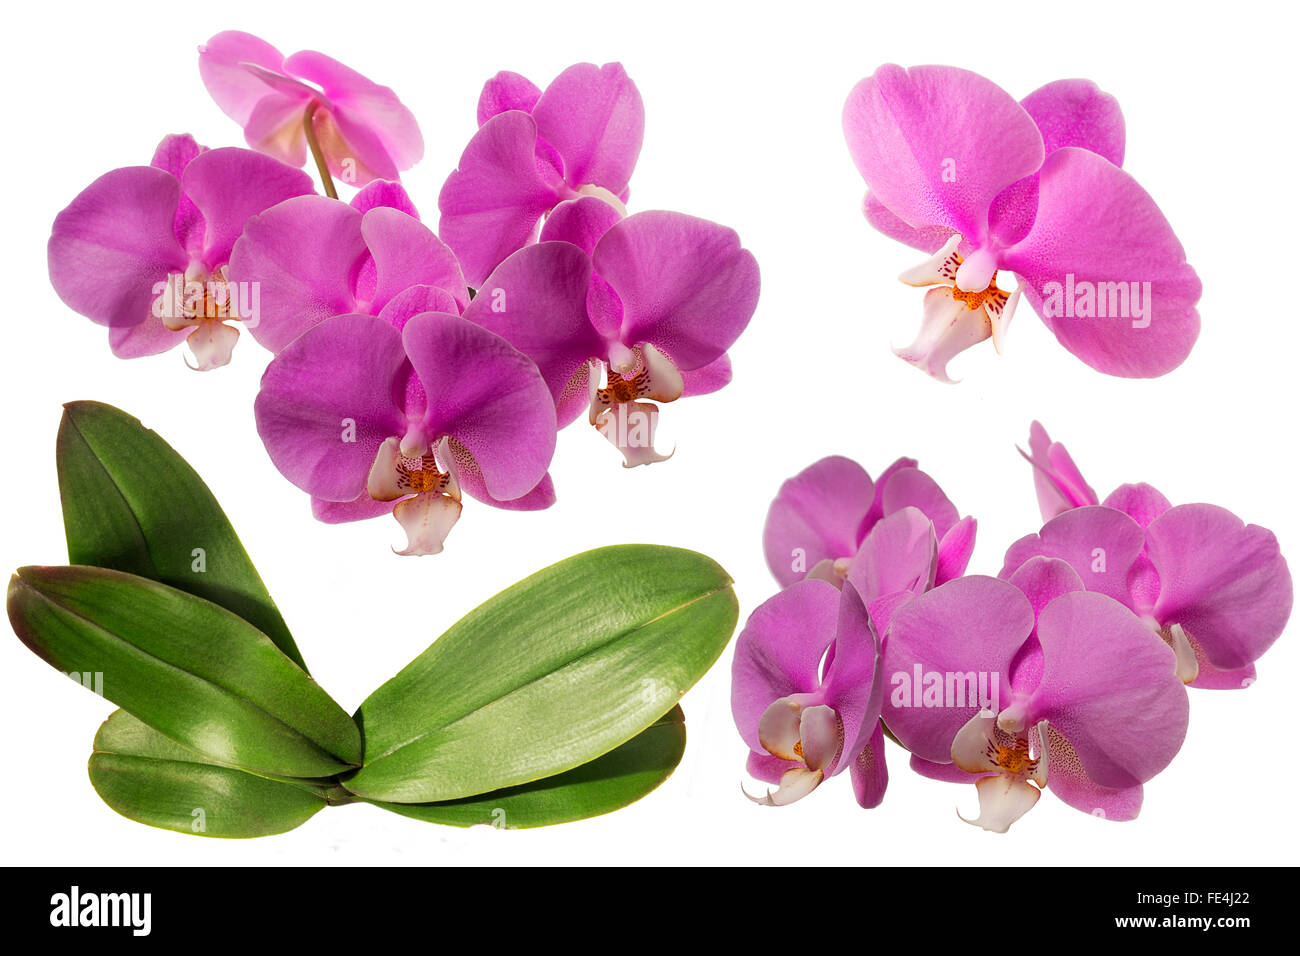 Blooming Orchid. Collage. Isolated. With leaves Stock Photo